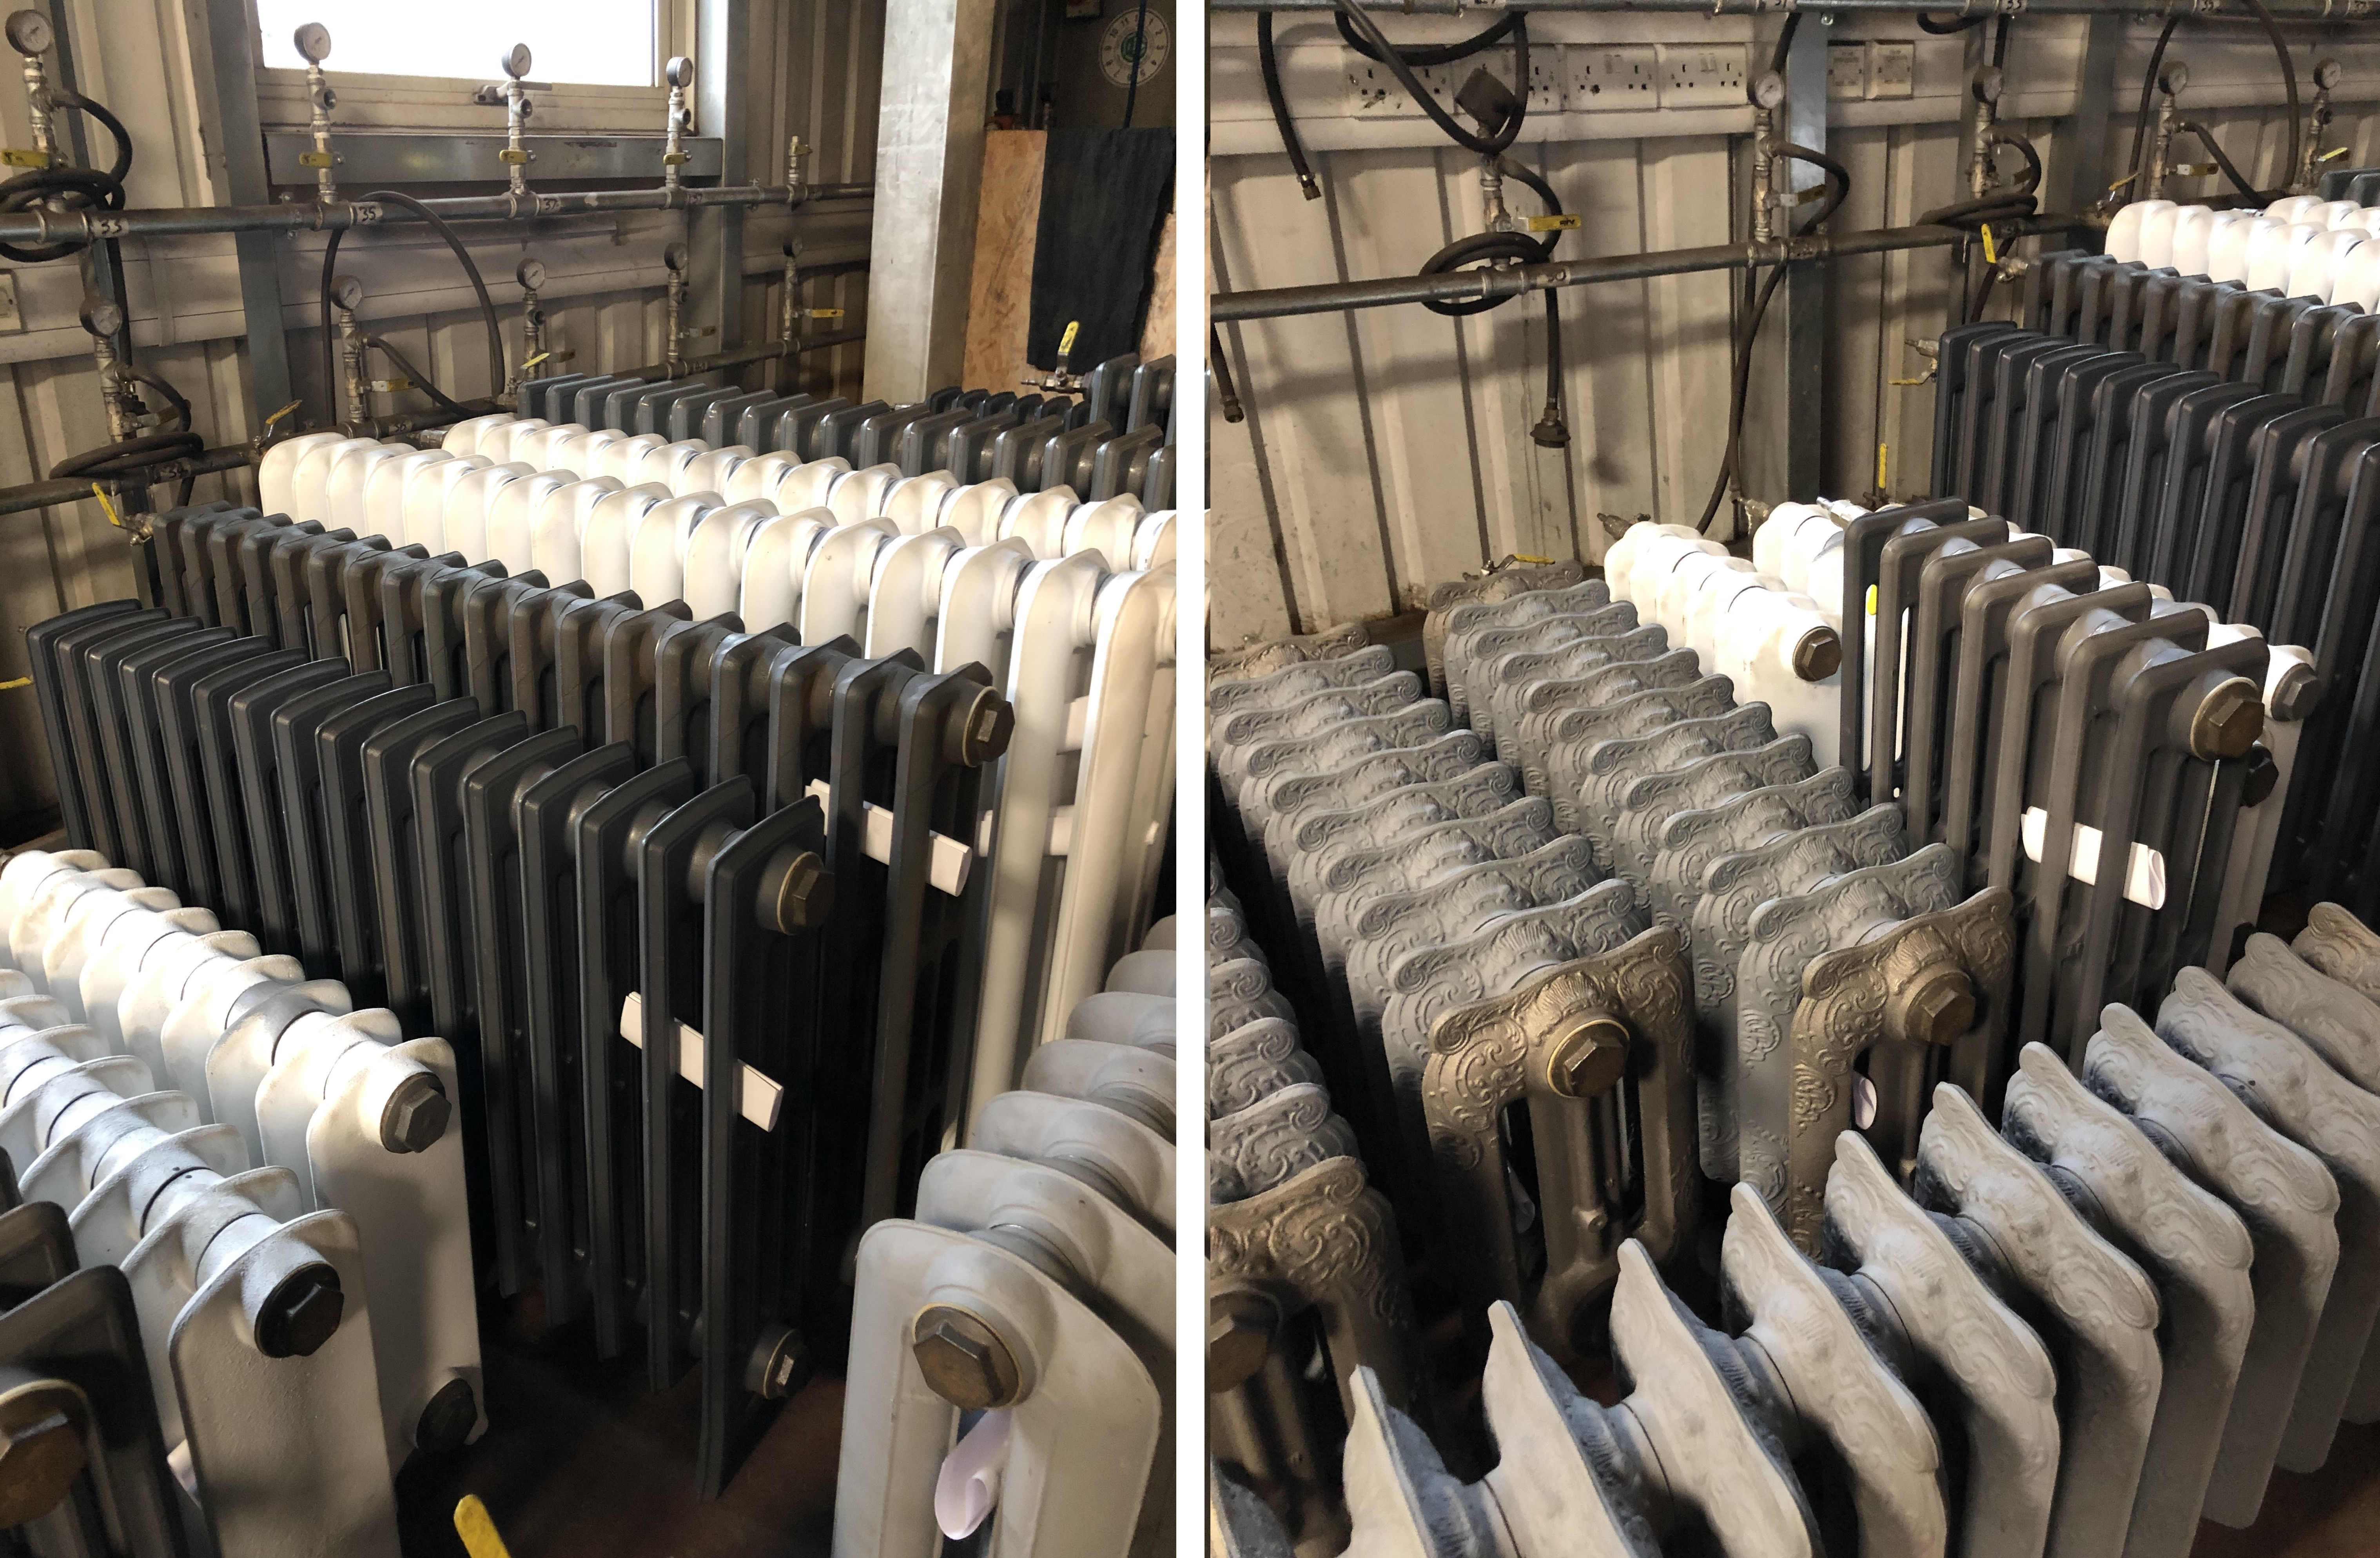 Carron Cast Iron Radiators Being Made In The Factory